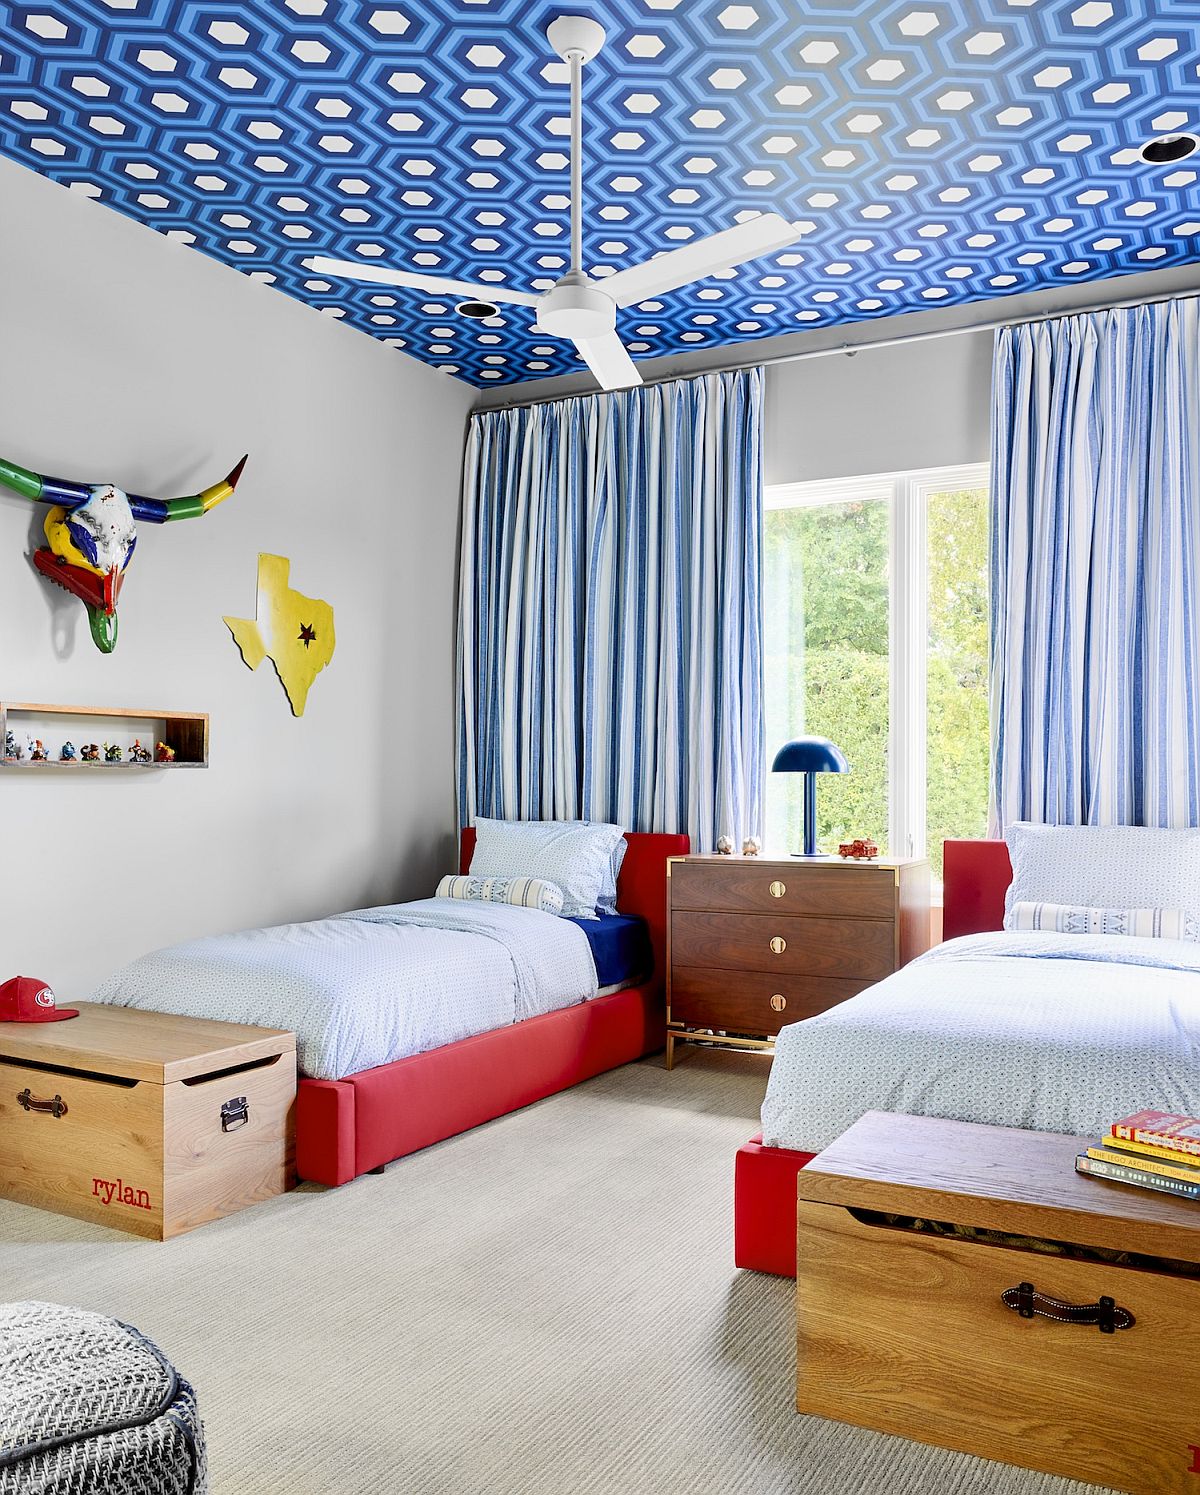 Wallpaper on the Ceiling: Ideas to Make Kids’ Rooms Even More
Brilliant!